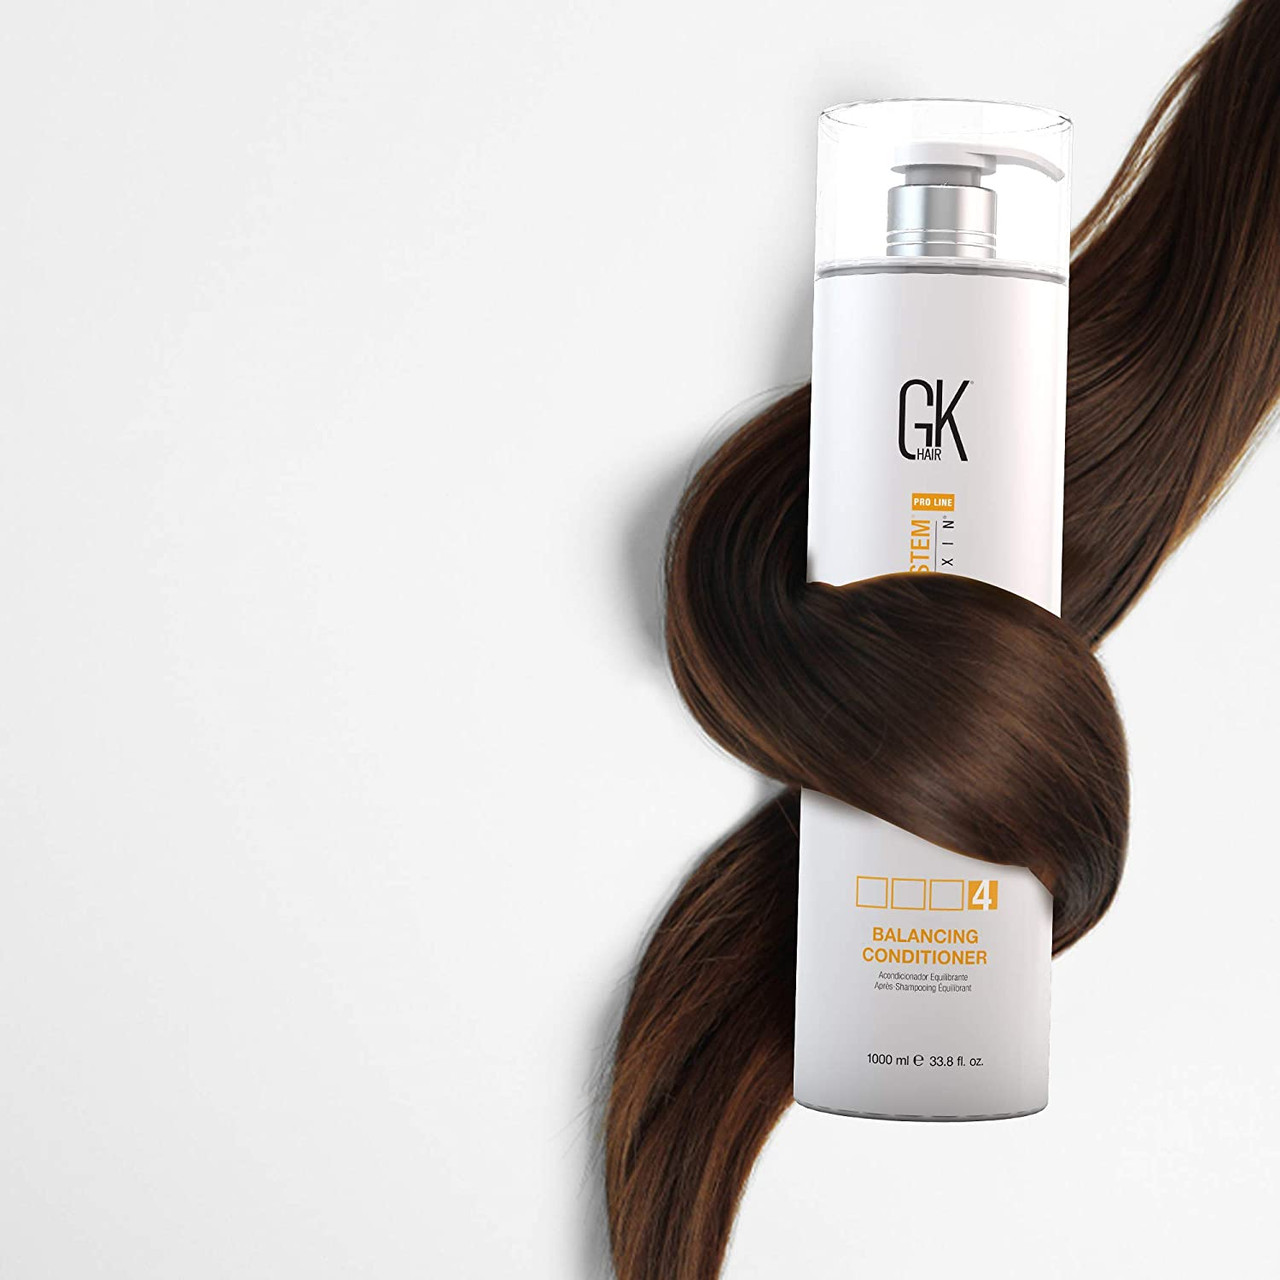 GK HAIR Global Keratin Balancing Conditioner 338 Fl Oz1000ml For Oily   Color Treated Hair